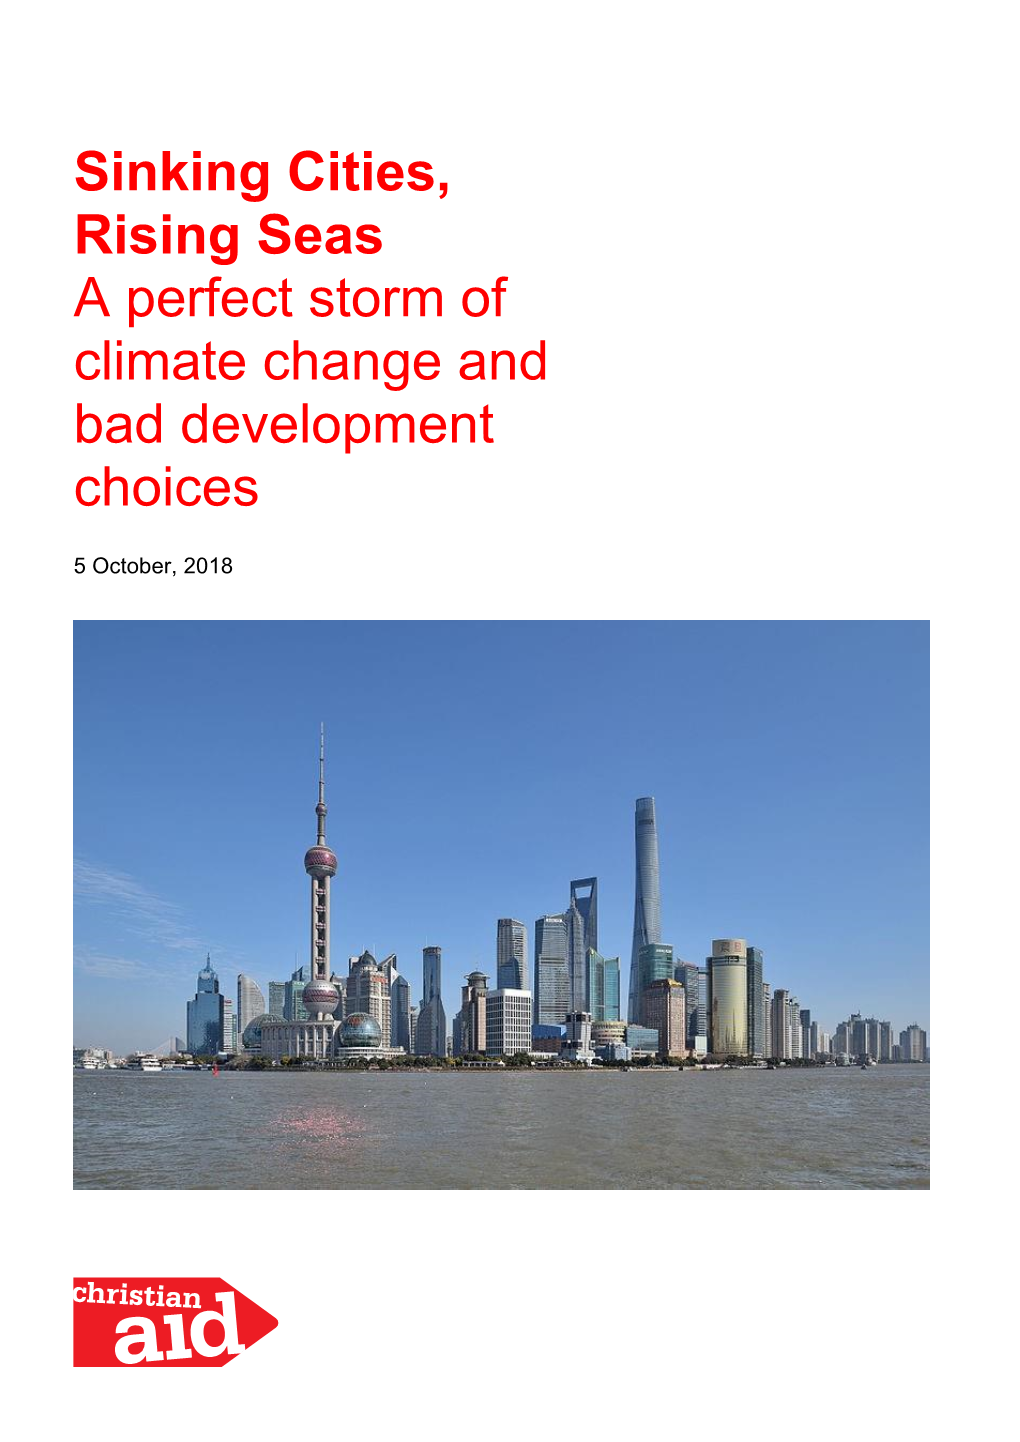 Sinking Cities, Rising Seas: a Perfect Storm of Climate Change and Bad Development Choices